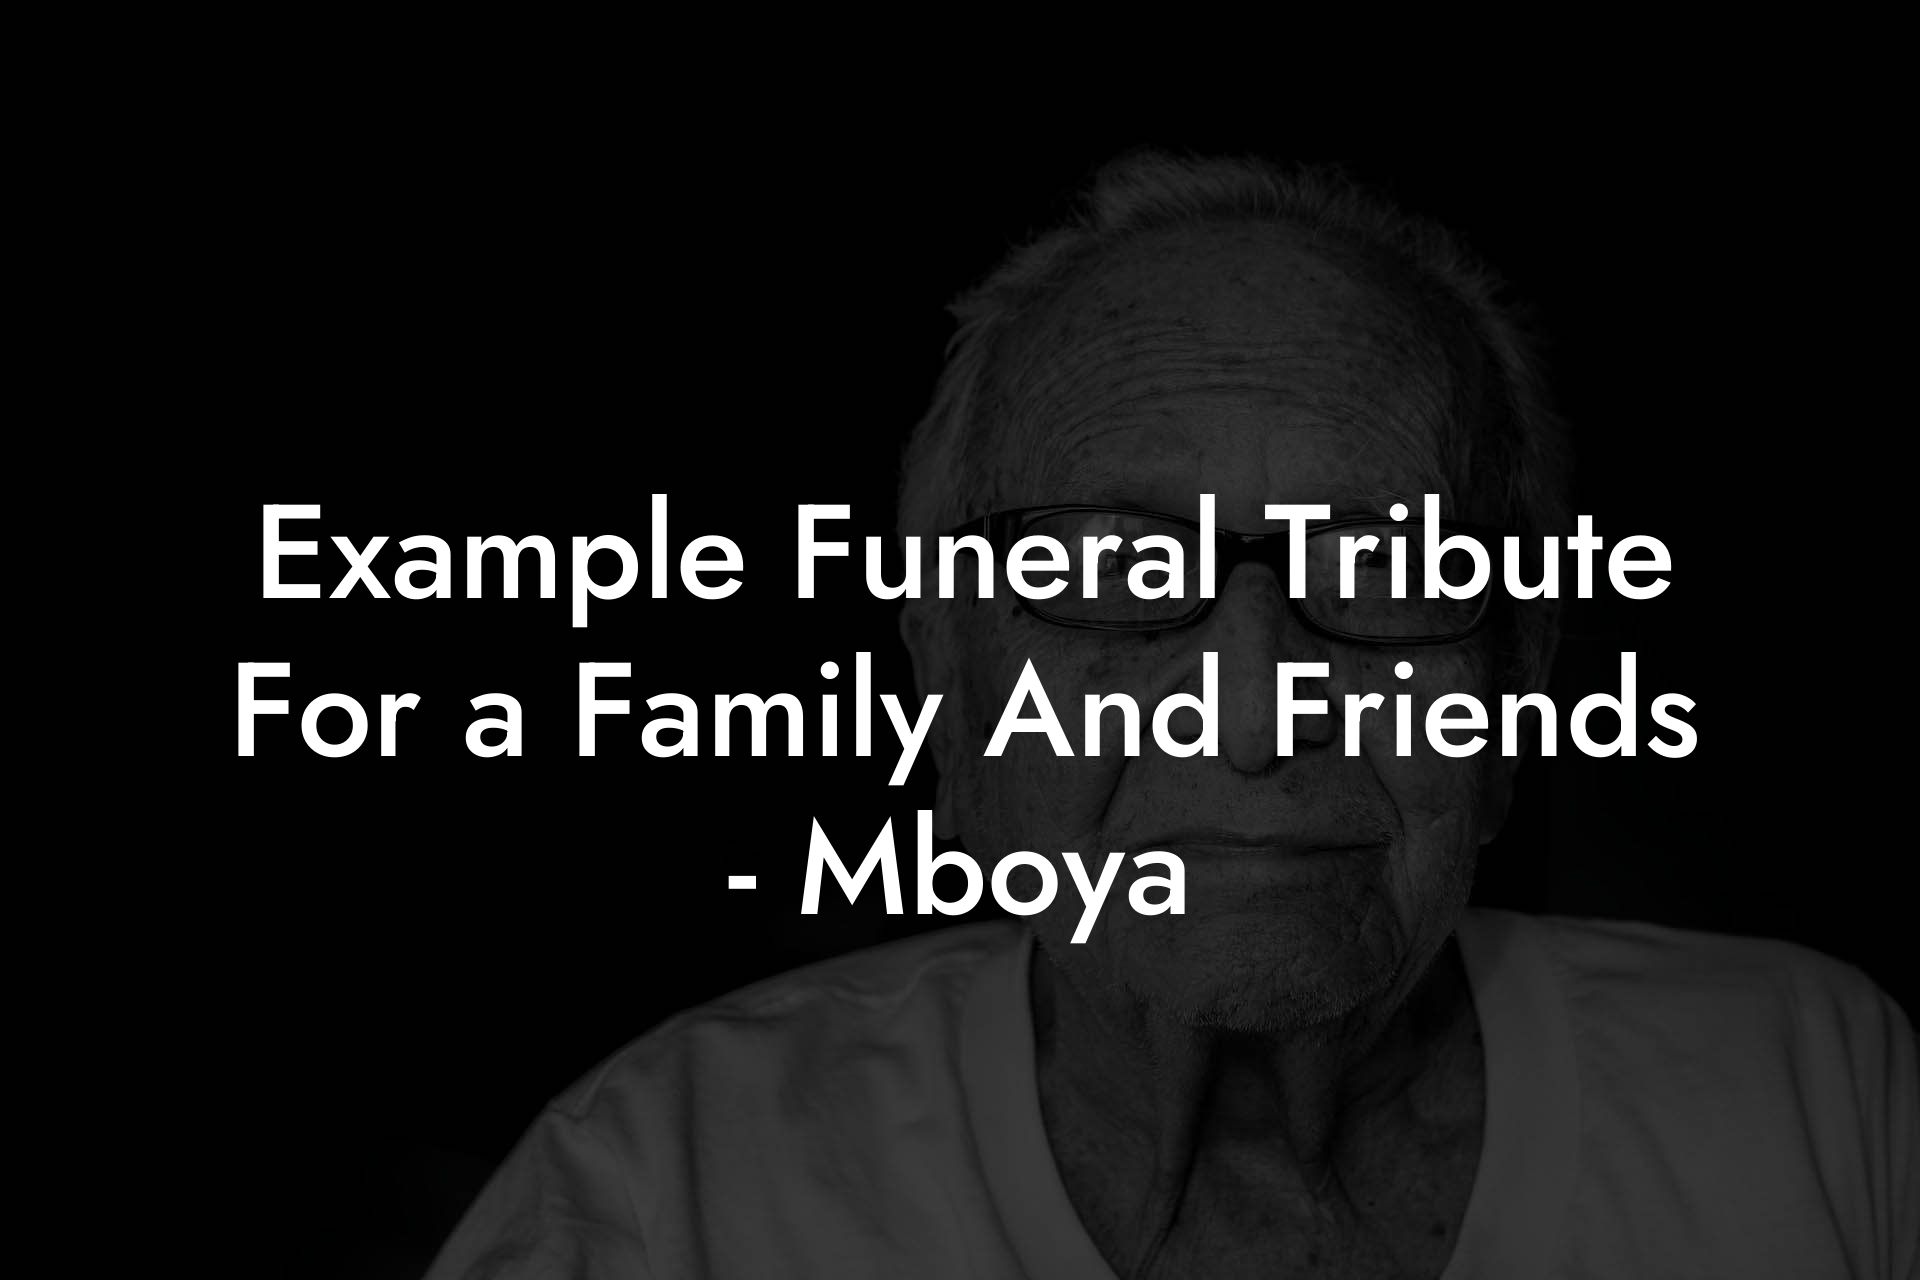 Example Funeral Tribute For a Family And Friends - Mboya